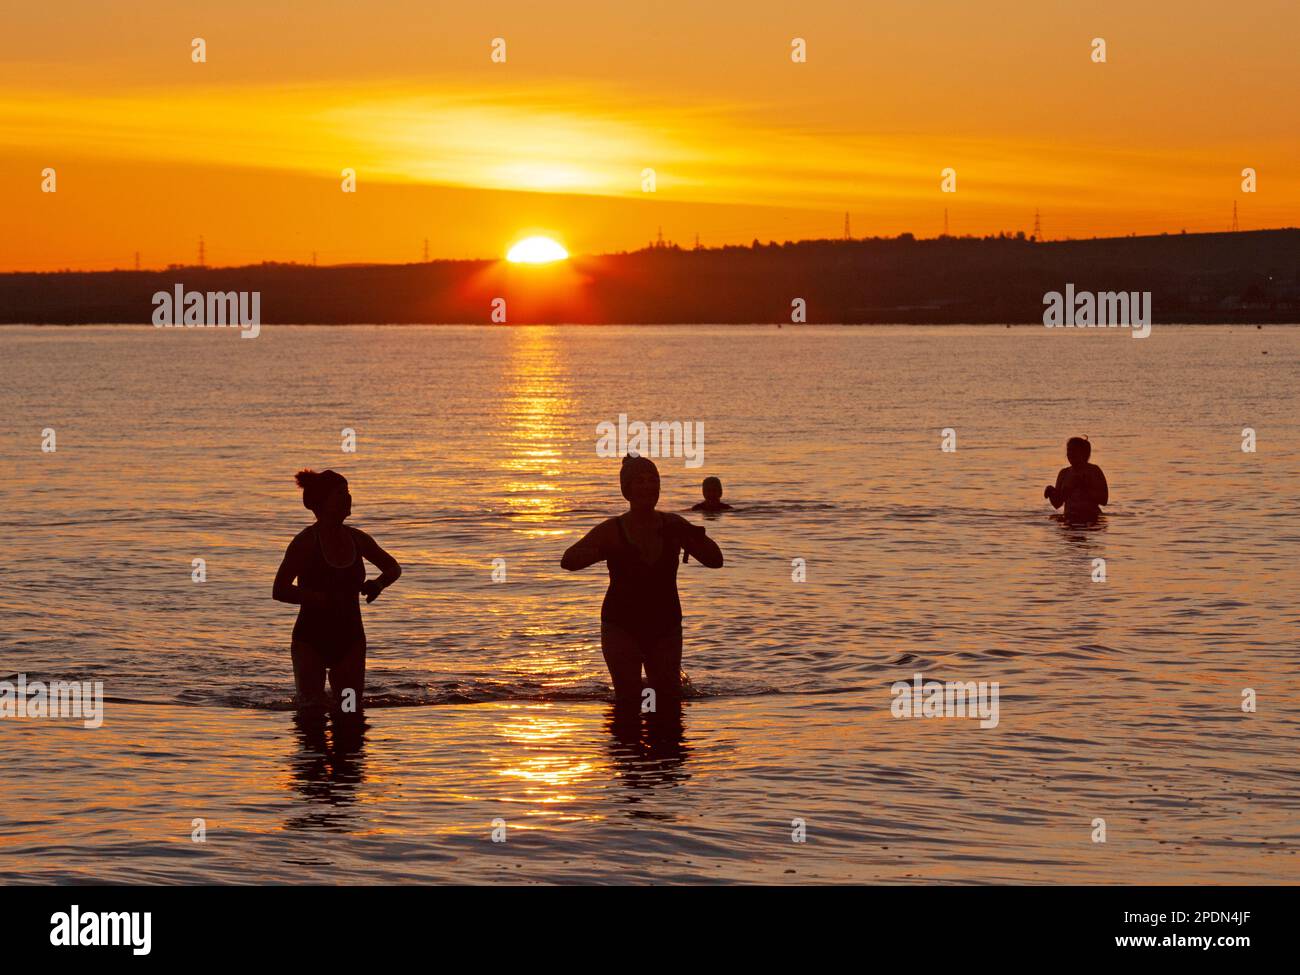 Portobello, Edinburgh, Scotland, UK. 15th March 2023. Temperature minus 4 degrees centigrade made for a freezing dawn at the seaside by the Firth of Forth for those brave enough to venture out for a cold water swim. Within an hour the sun had disappered behind a veil of cloud. Credit: Archwhite/alamy live news. Stock Photo